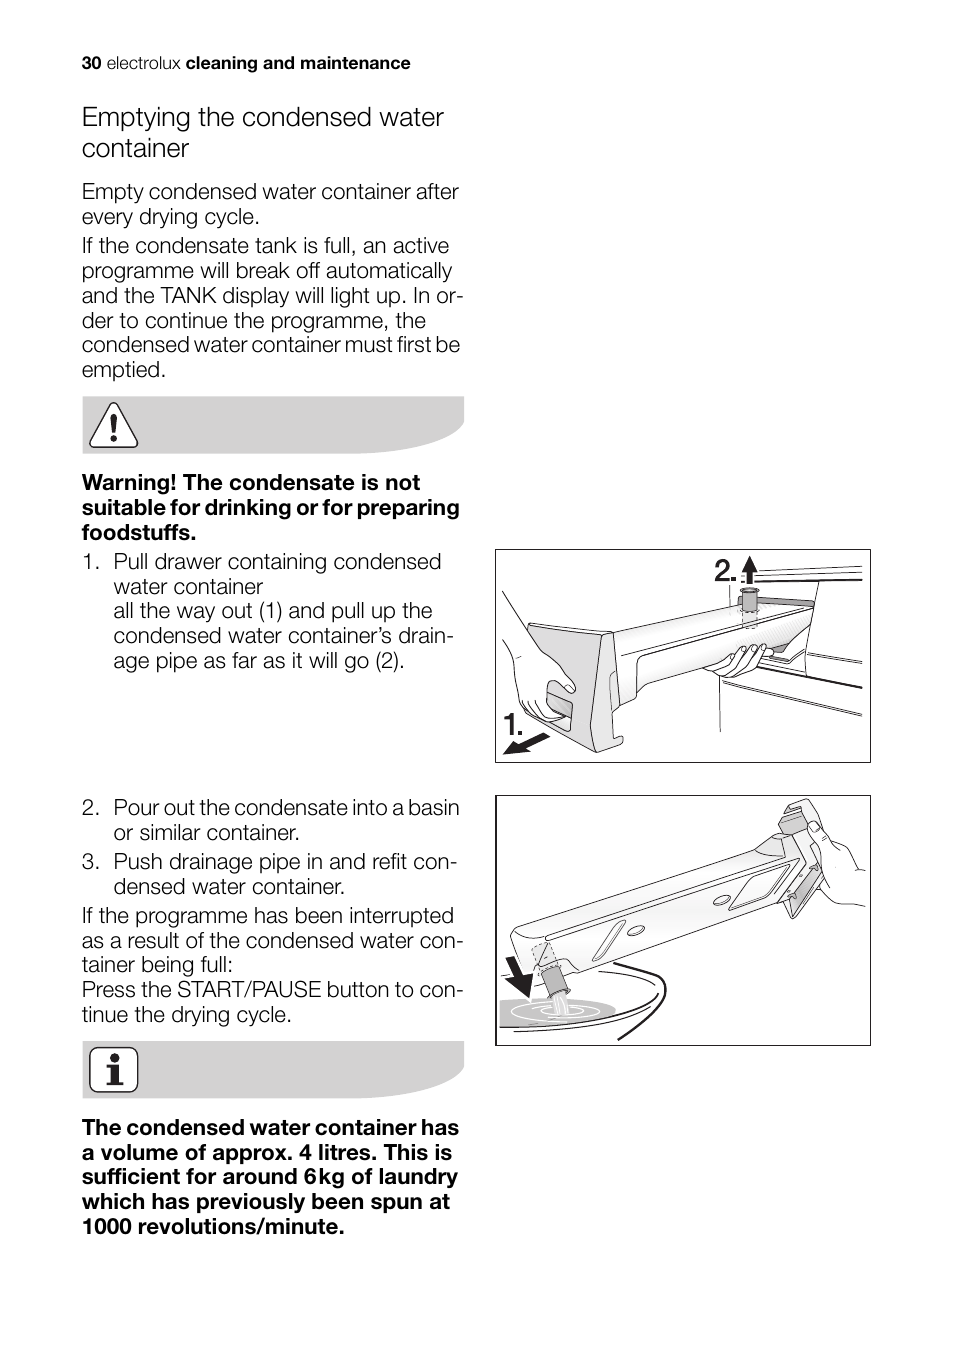 Emptying the condensed water container | Electrolux EDI 96150 W User Manual  | Page 30 / 48 | Original mode